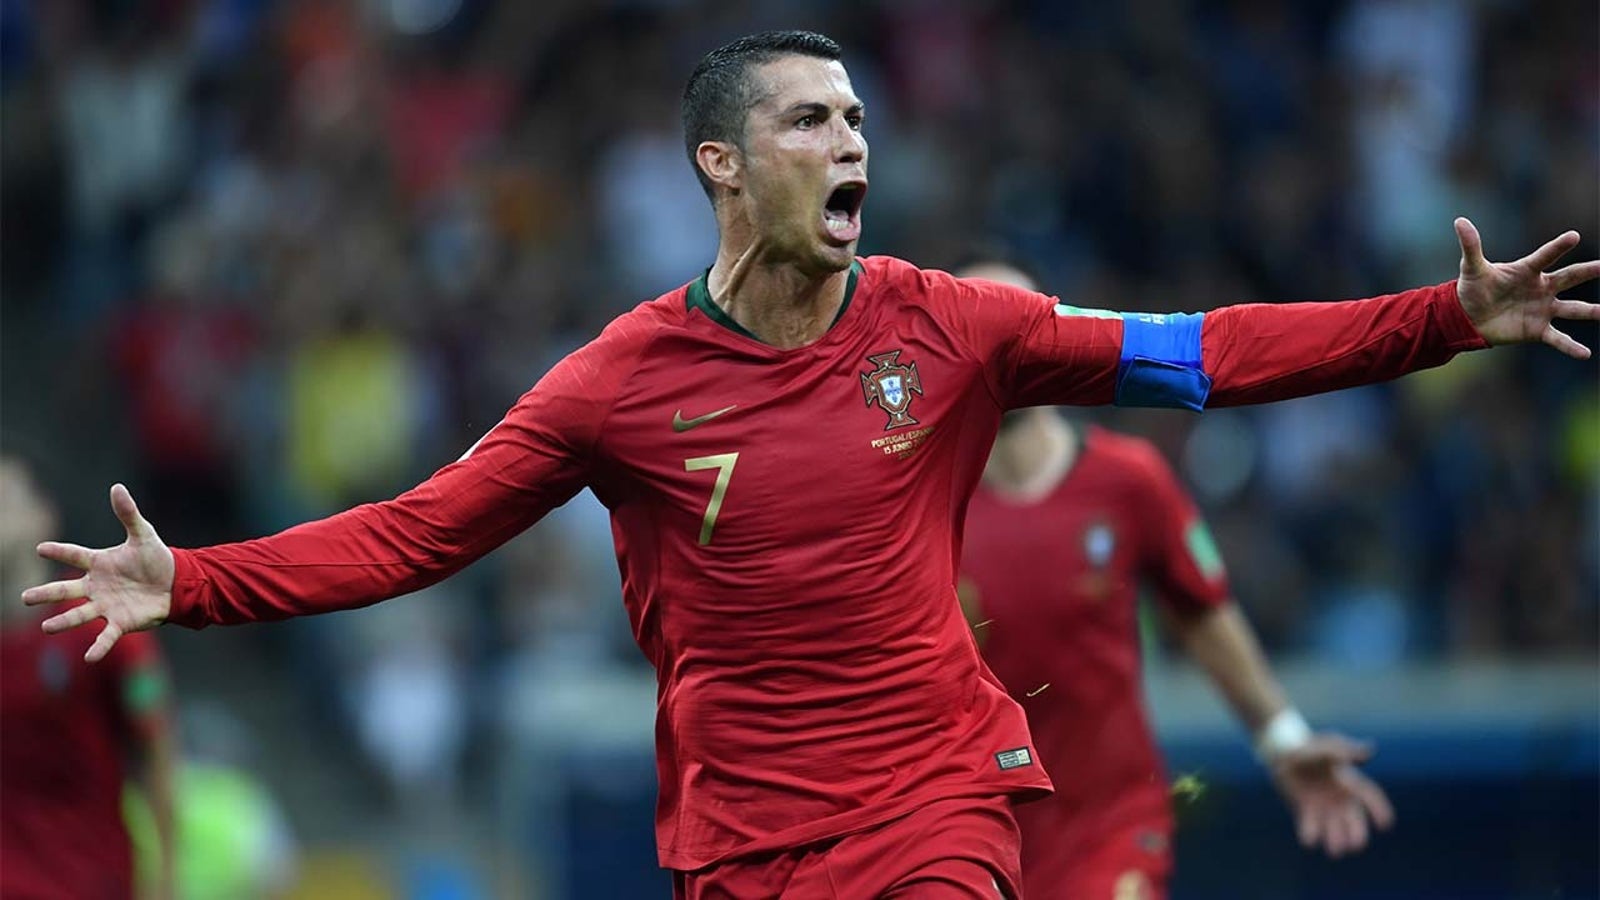 On this day: Cristiano Ronaldo scores a HAT-TRICK against Spain in the 2018 World Cup!